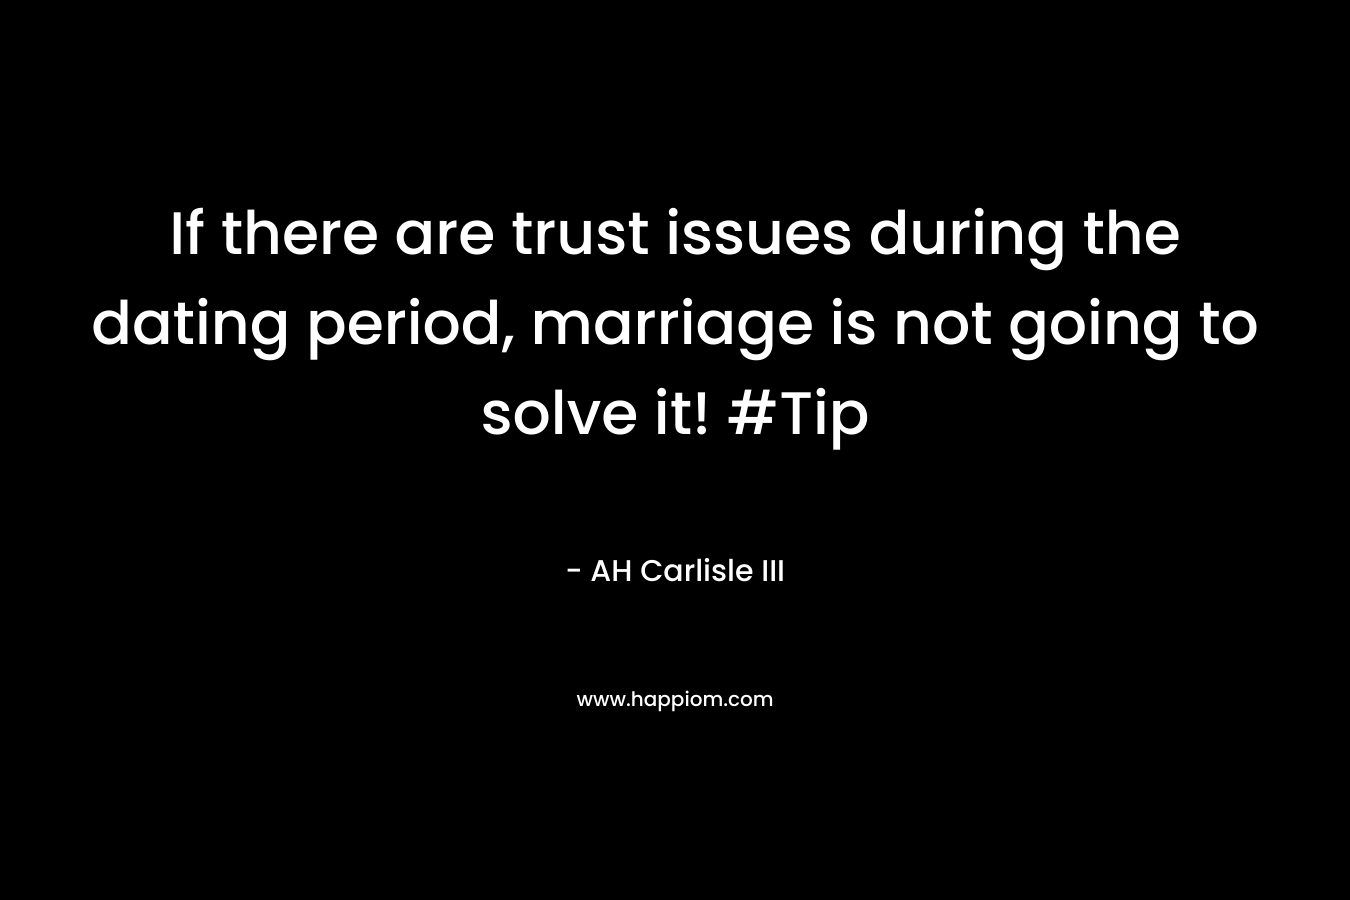 If there are trust issues during the dating period, marriage is not going to solve it! #Tip – AH Carlisle III